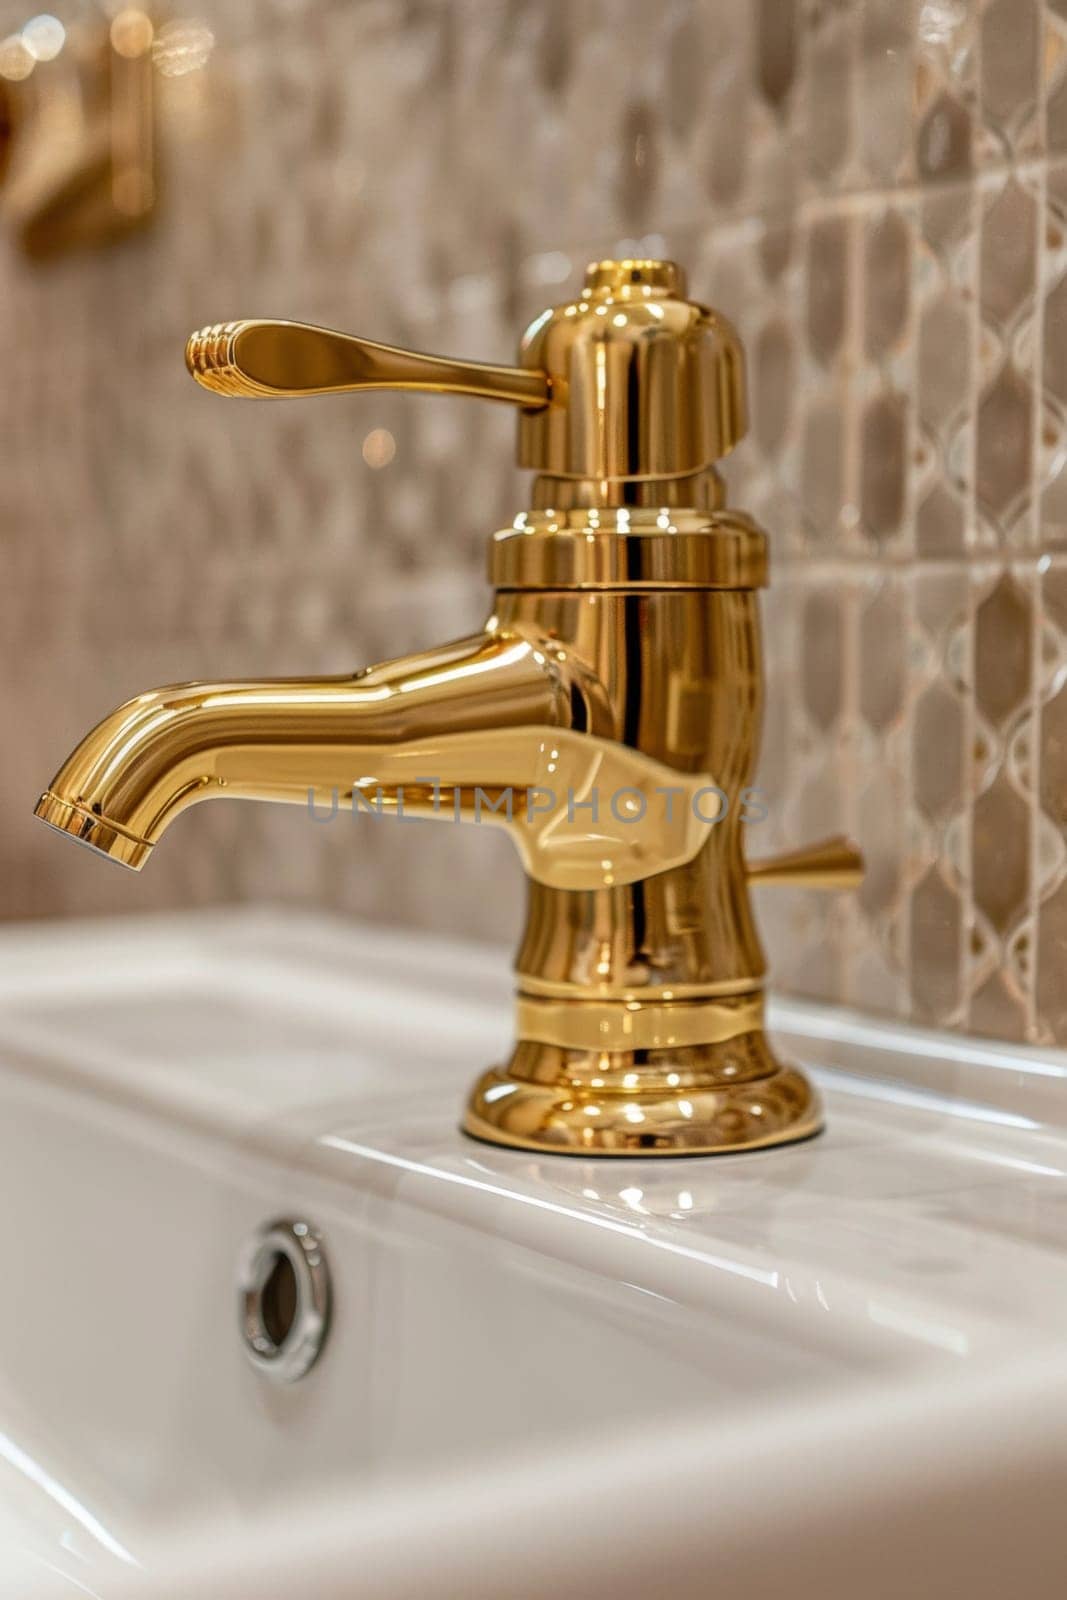 A close up of a gold faucet on the sink in front